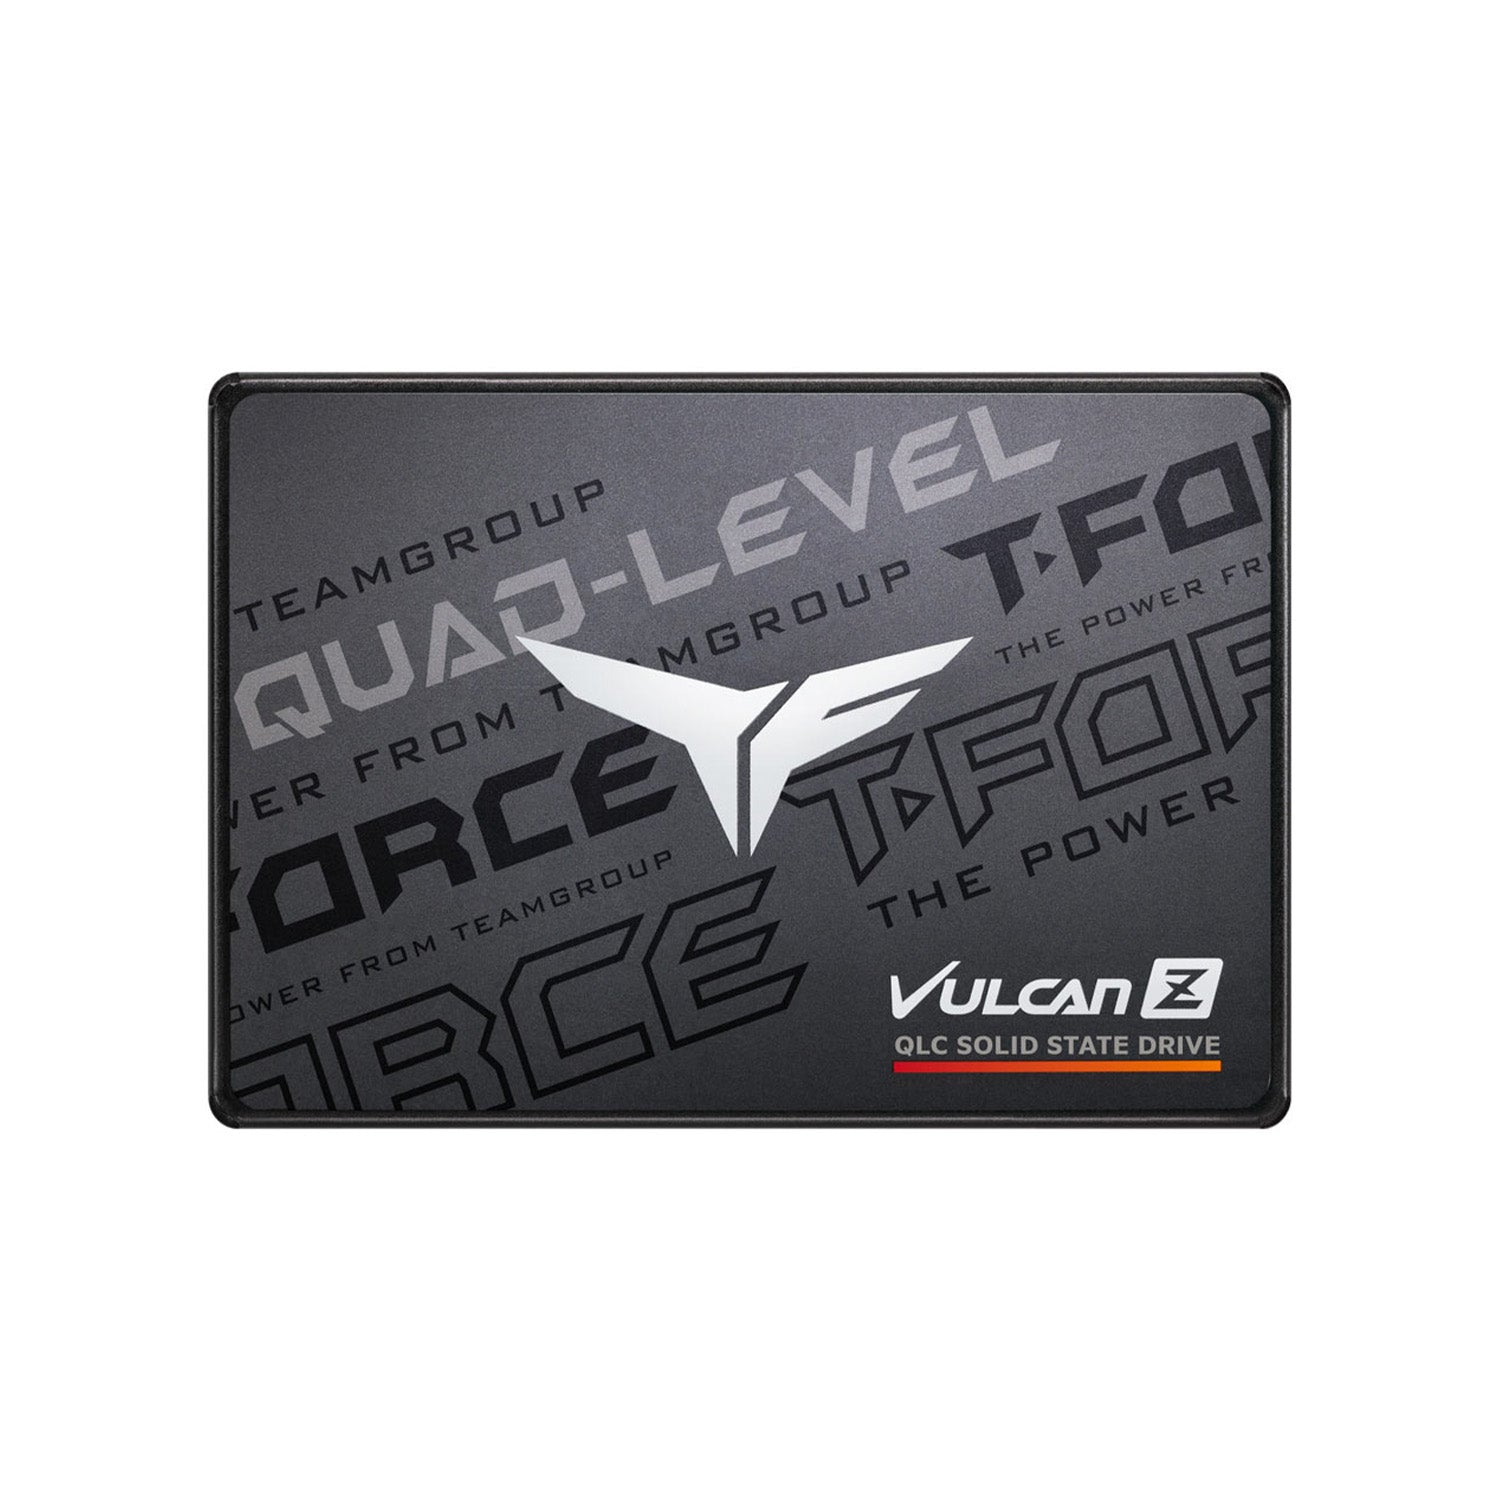 TEAMGROUP T-Force Vulcan Z 2TB Solid State Drive, Up to 550MB/s Read, 3D NAND 2.5 Inch SATA Rev. 3.0 (6Gb/s) Internal SSD - T253TZ002T0C101